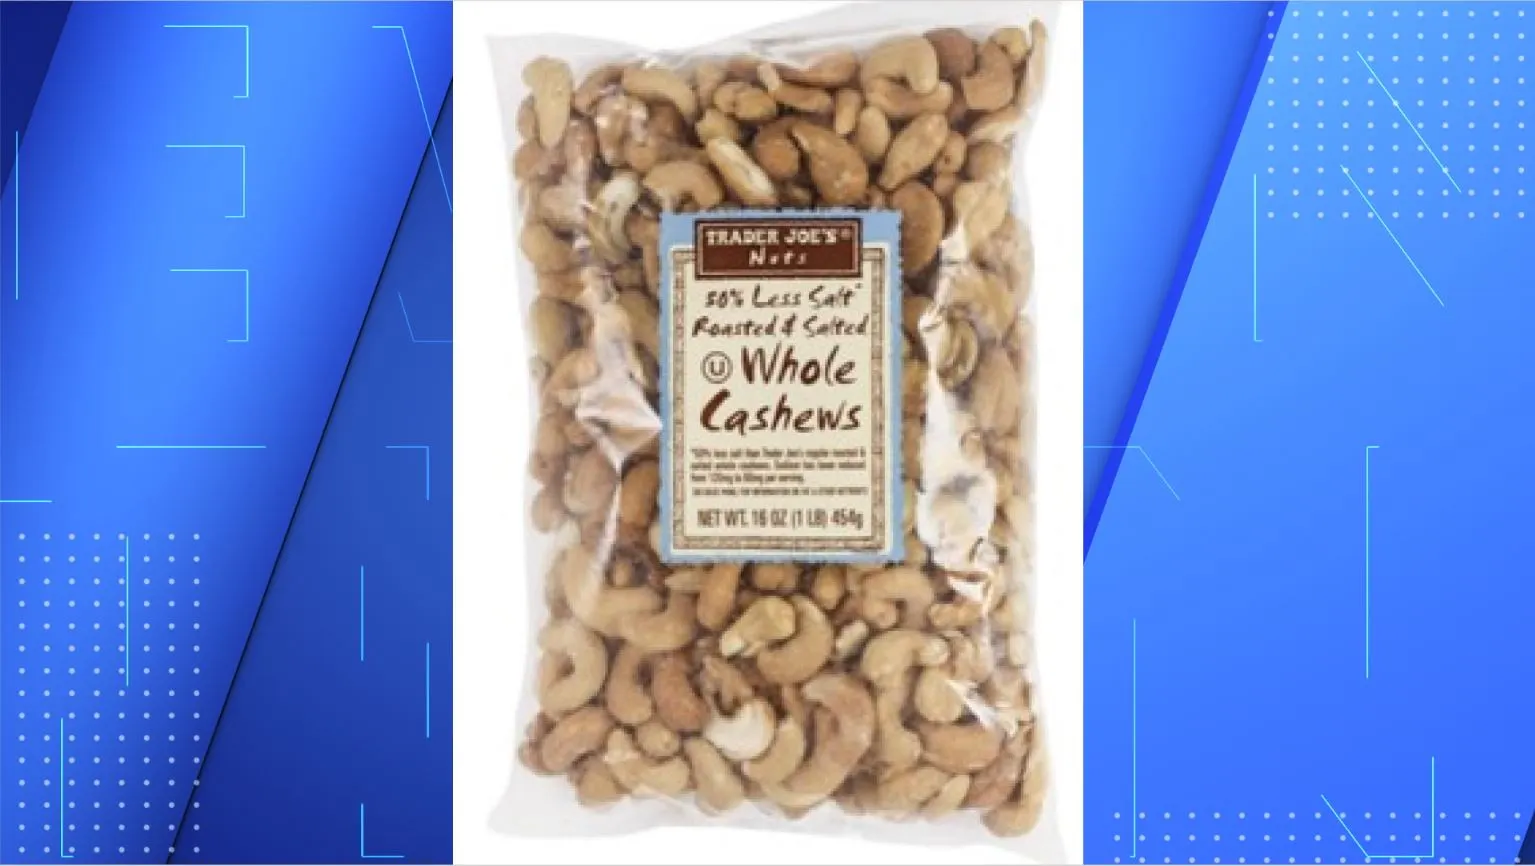 Alert for Shoppers: Major Cashew Recall at Trader Joe's Over Health Risks - What You Need to Know Now